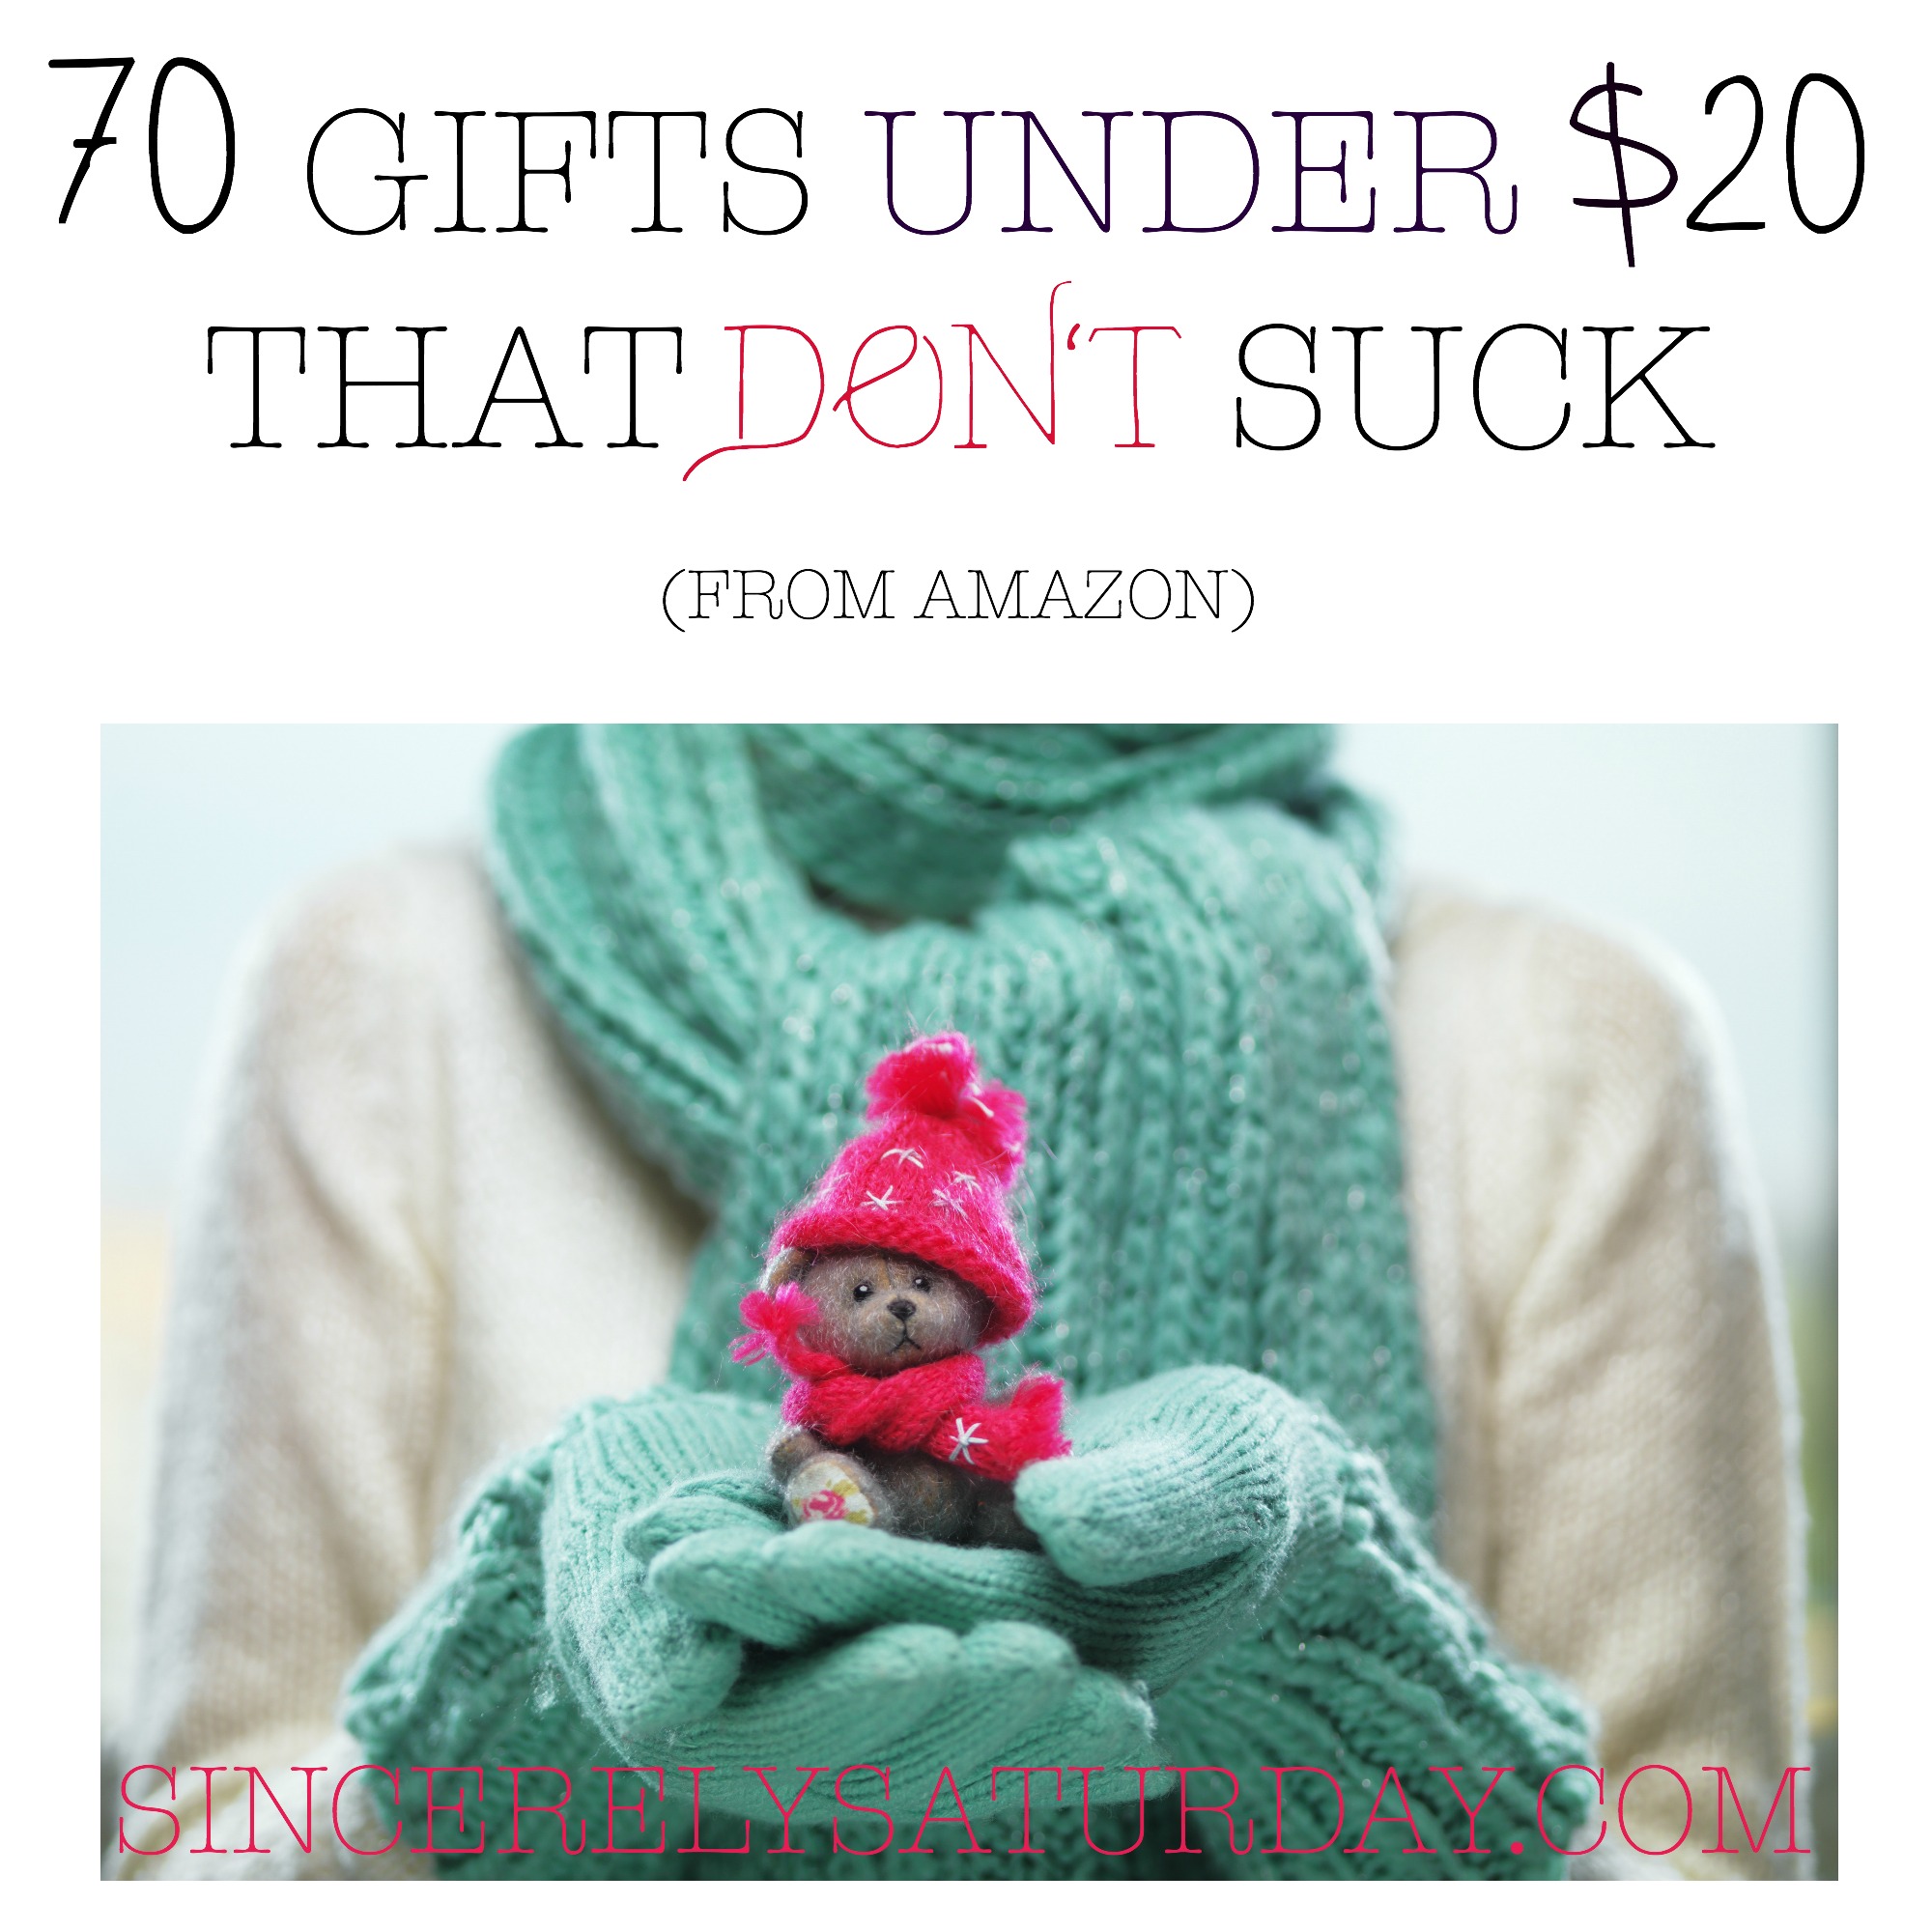 70 gifts under $20 that don't suck